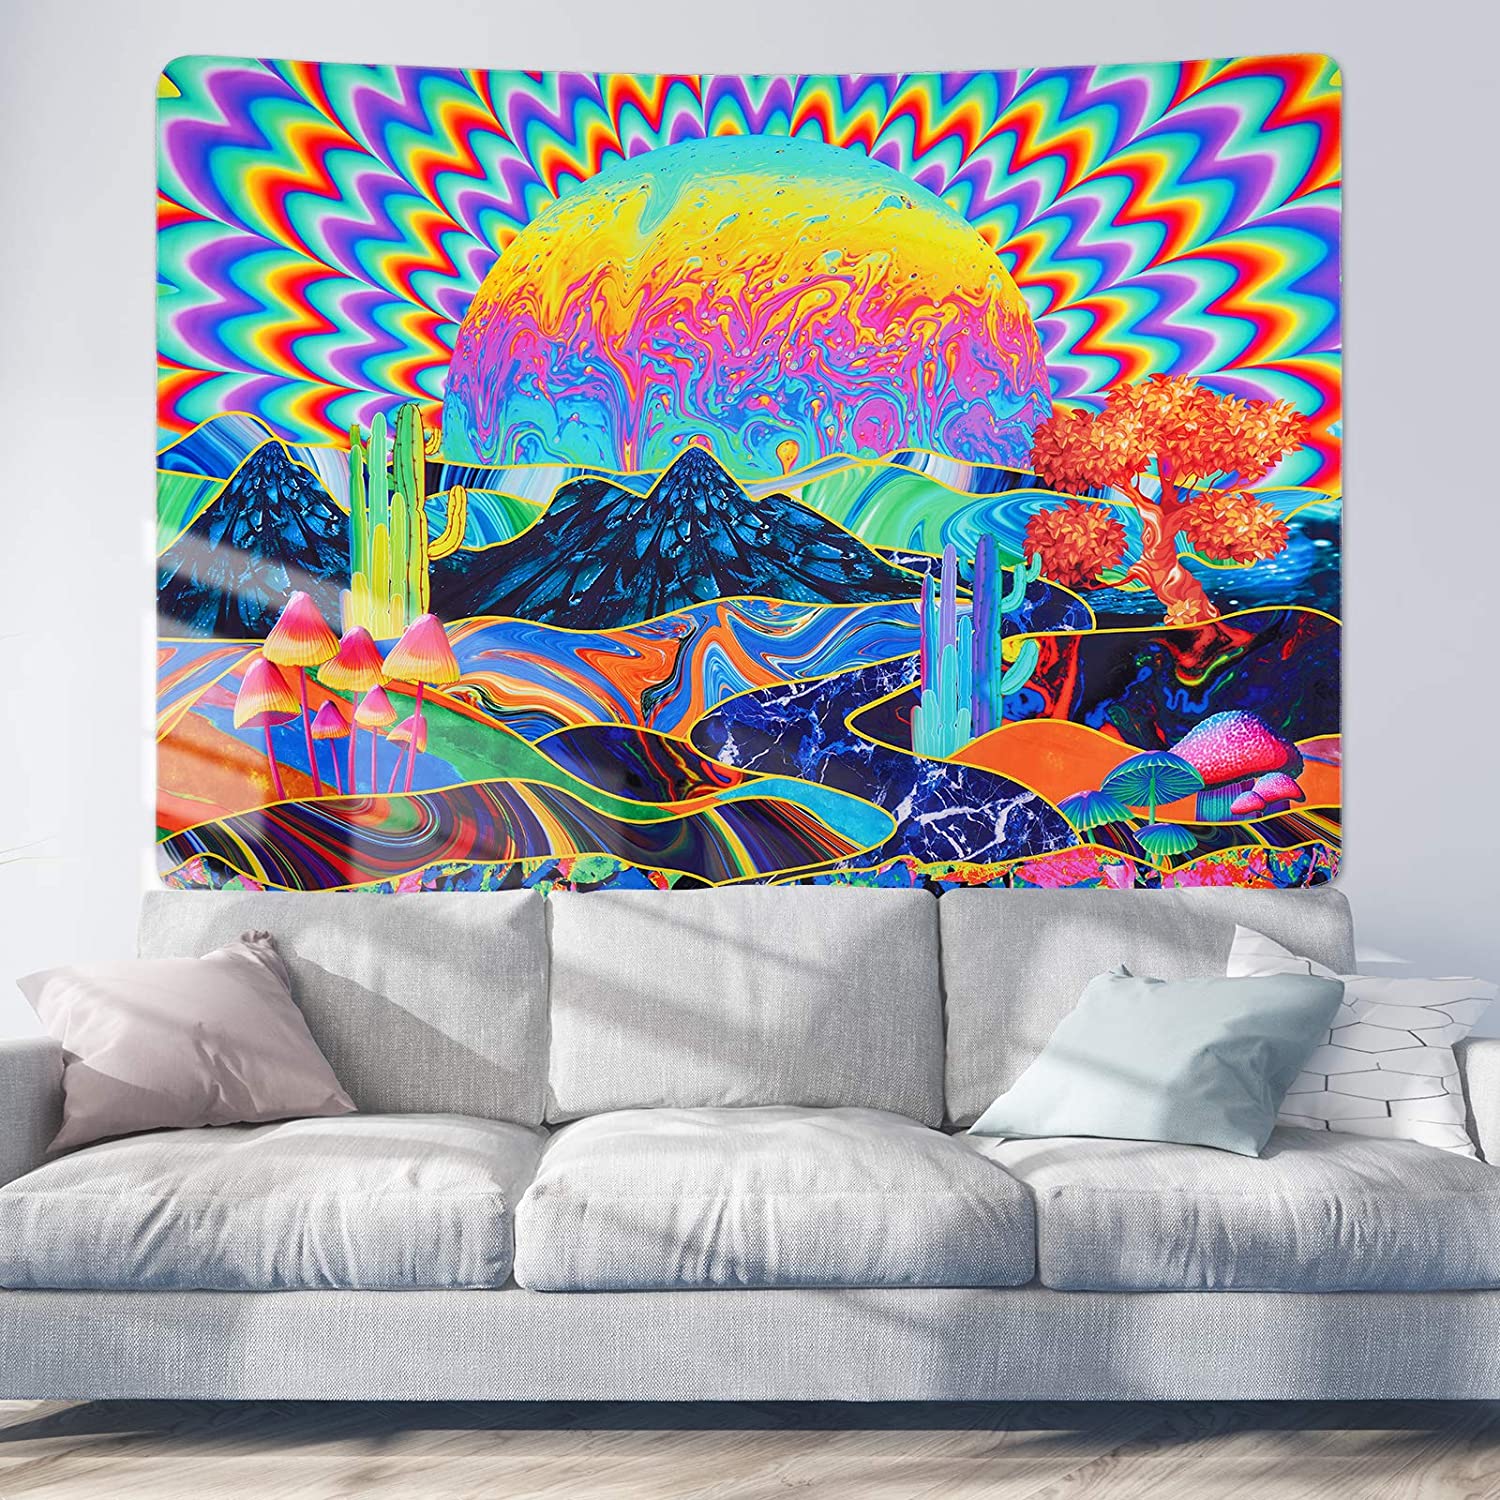 36.02 x 48.03 inches Mushroom Tapestry Psychedelic Eyes Tapestries Trippy Tapestry Colorful Flowers Tapestry Wall Hanging for Room